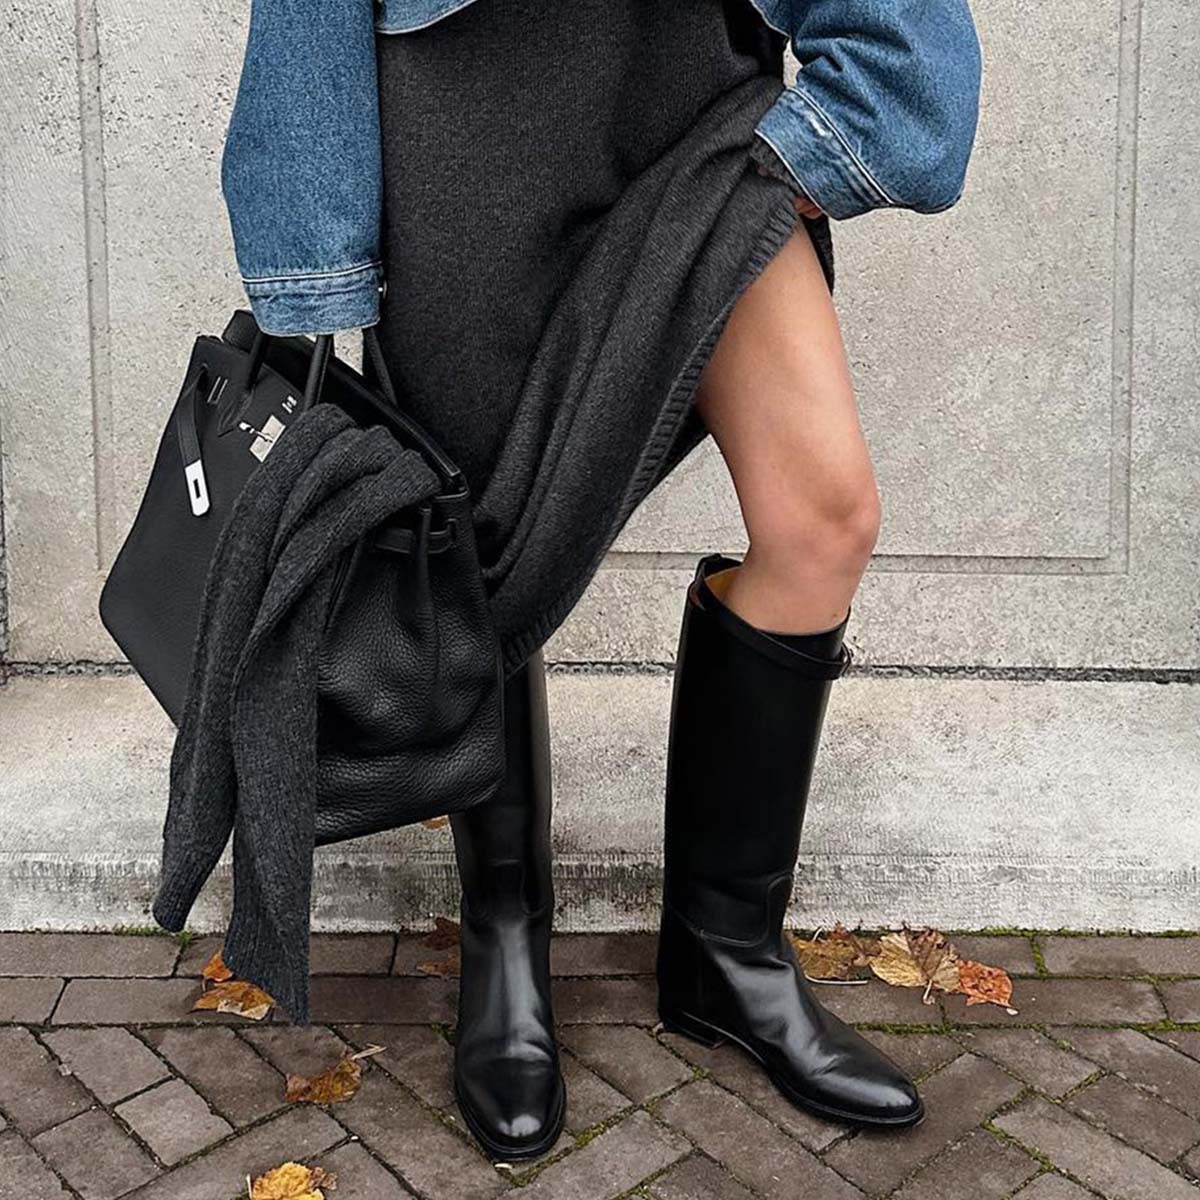 sneeuw Buigen Vertolking 10 Ways to Style Your Knee-High Boots That Scream Fall 2023 | Who What Wear